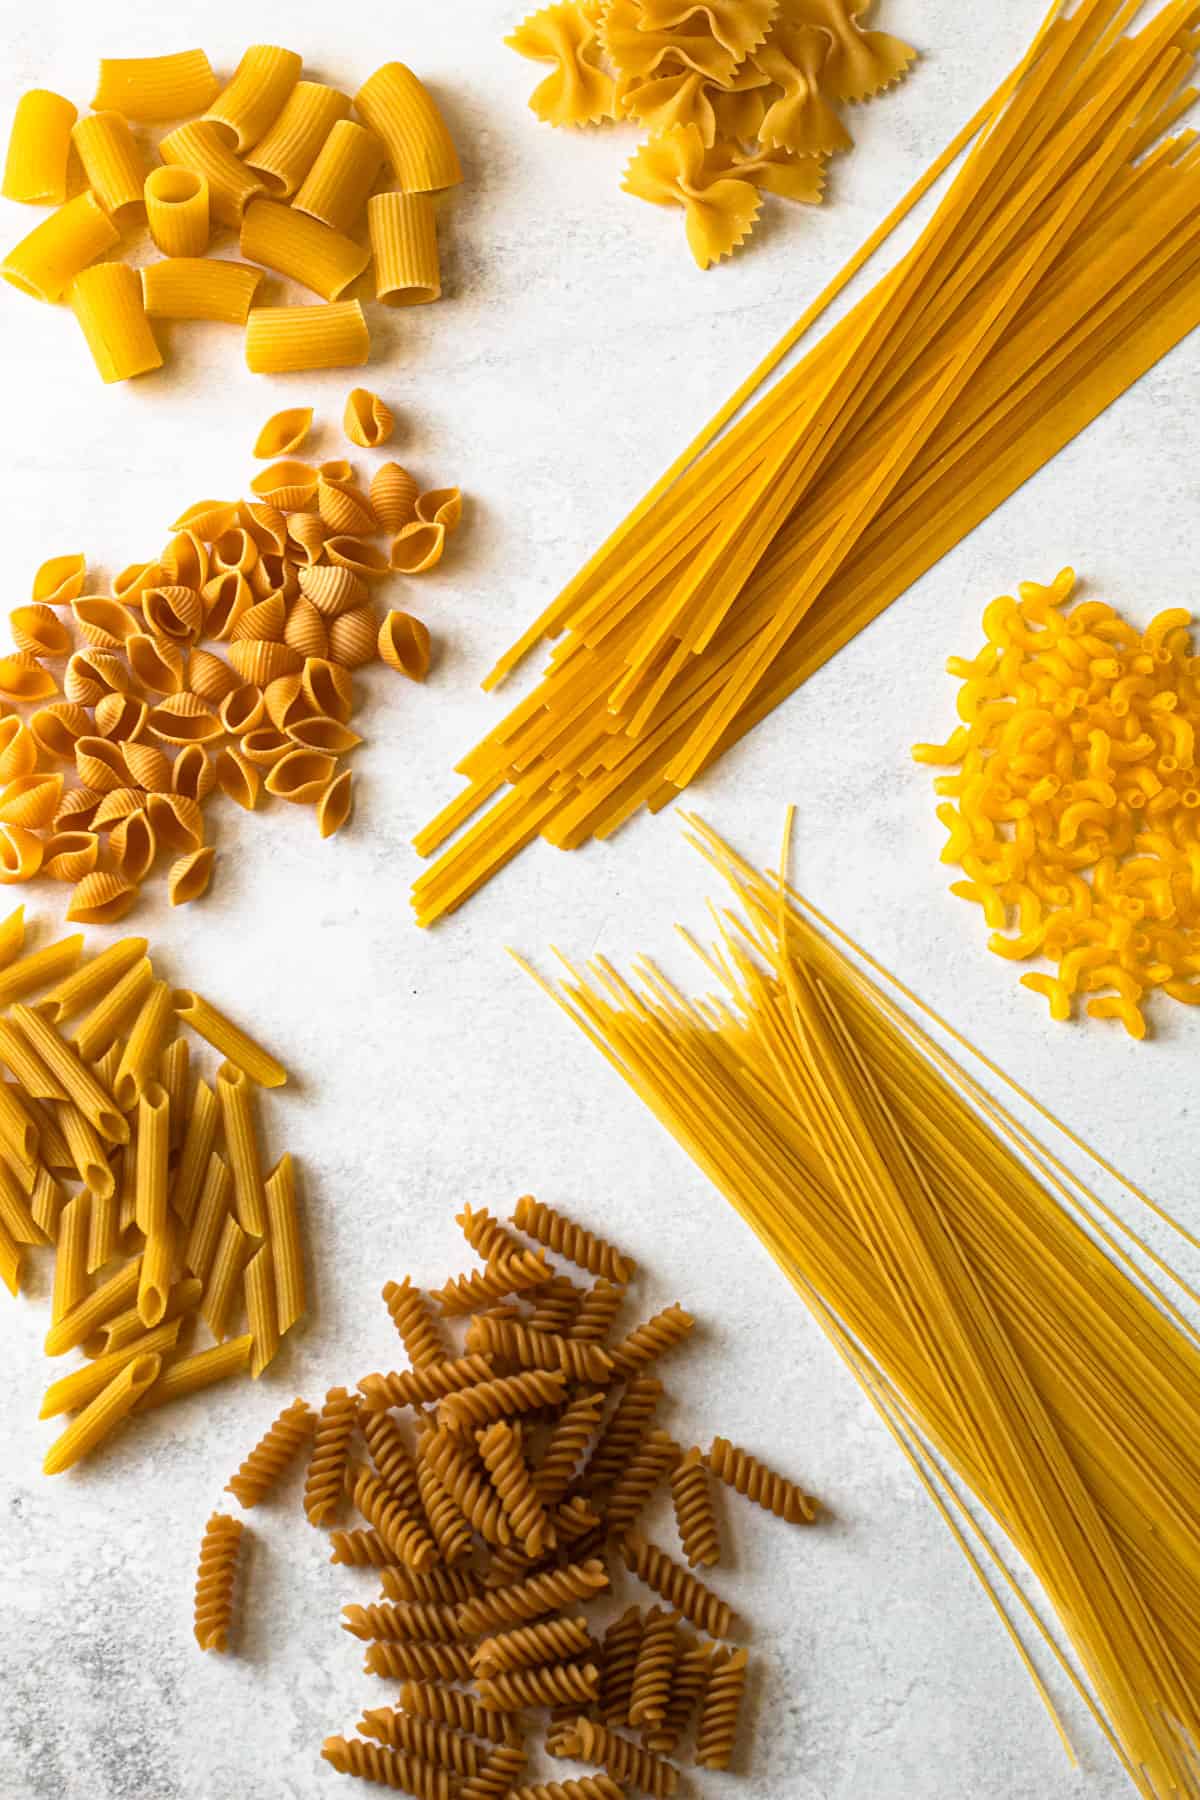 Types of Pasta, How to Cook it & More - Smith's Food and Drug